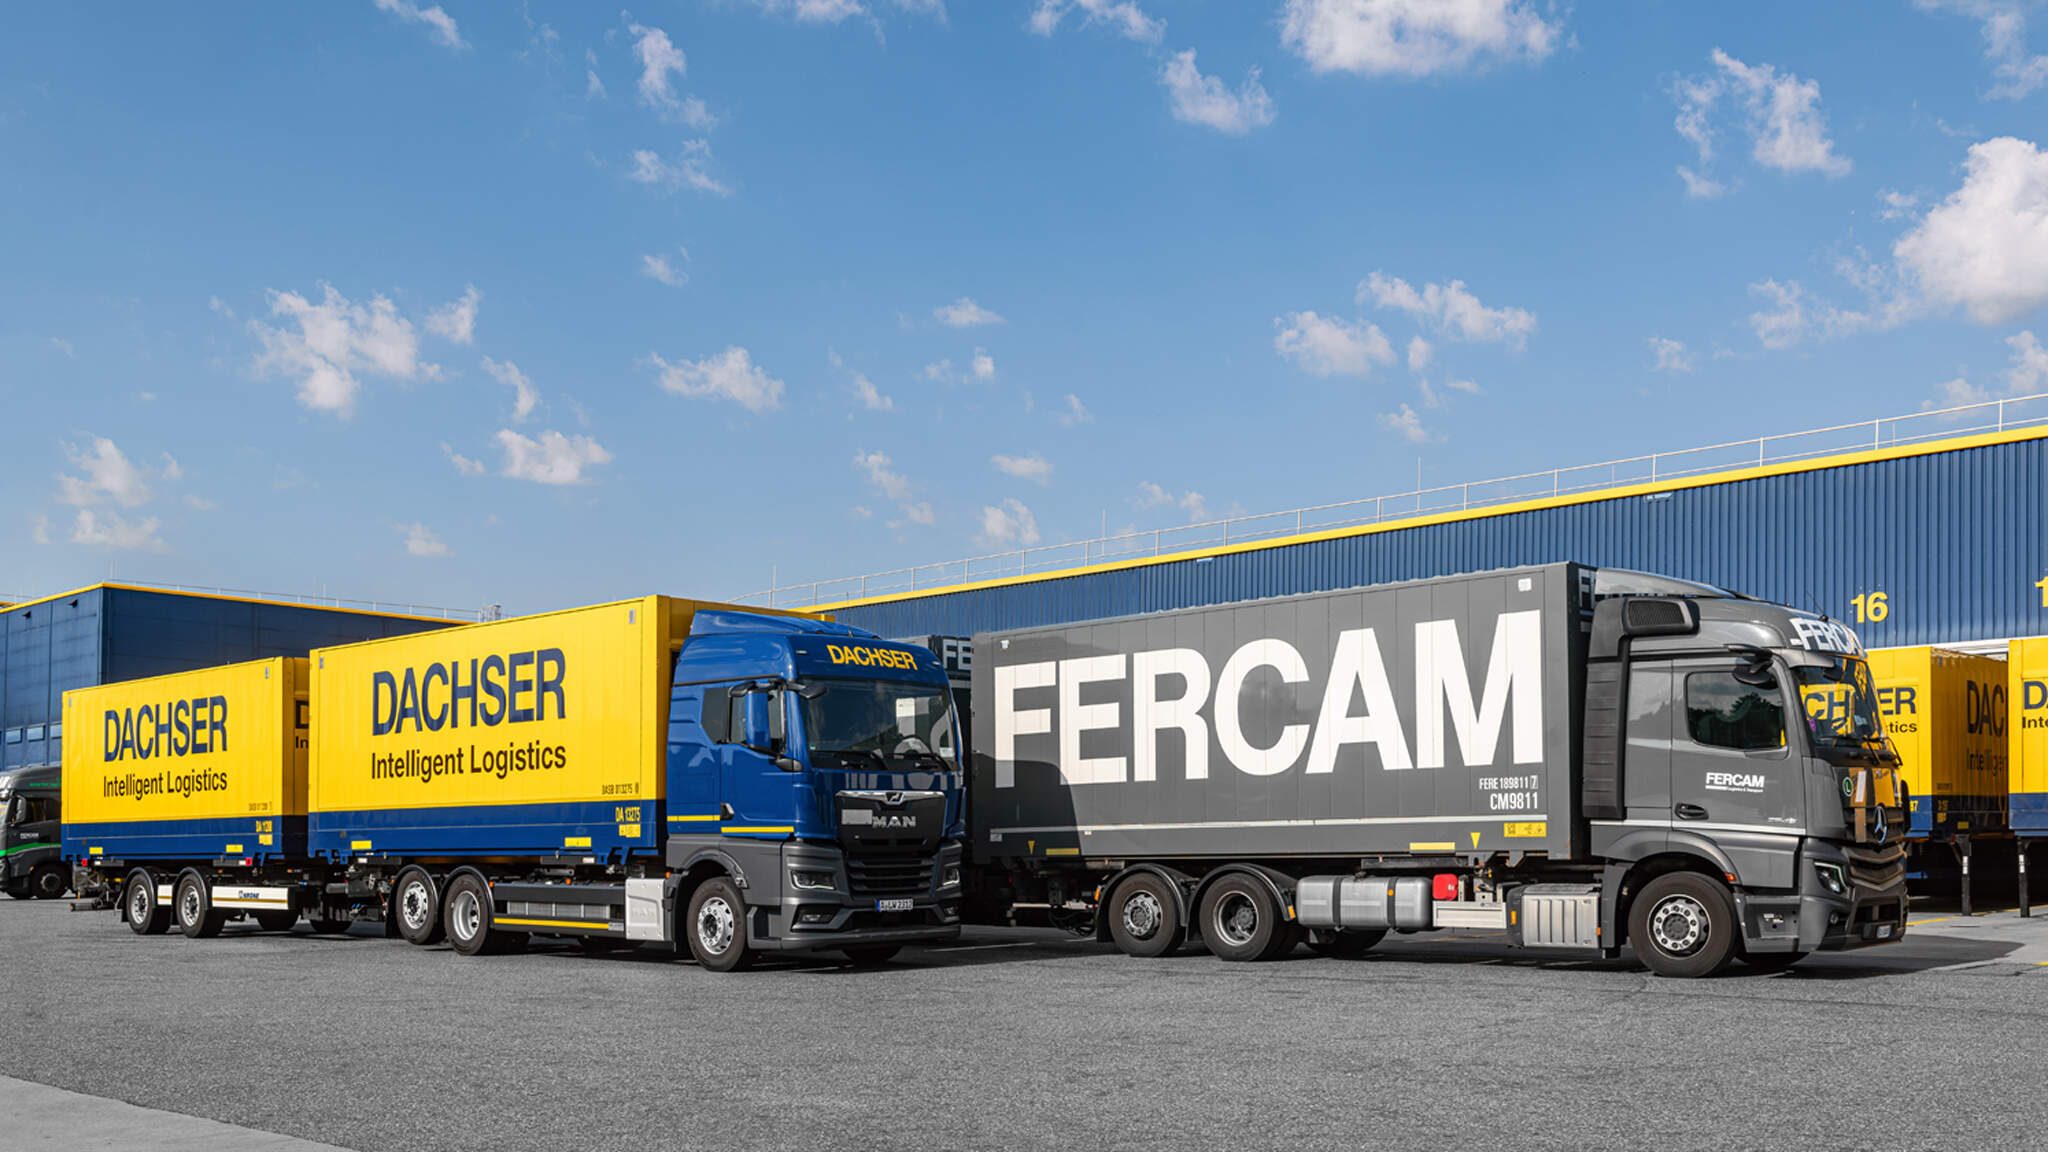 Thanks to their long-standing partnership, DACHSER and FERCAM are already fully in sync when it comes to operational groupage handling.